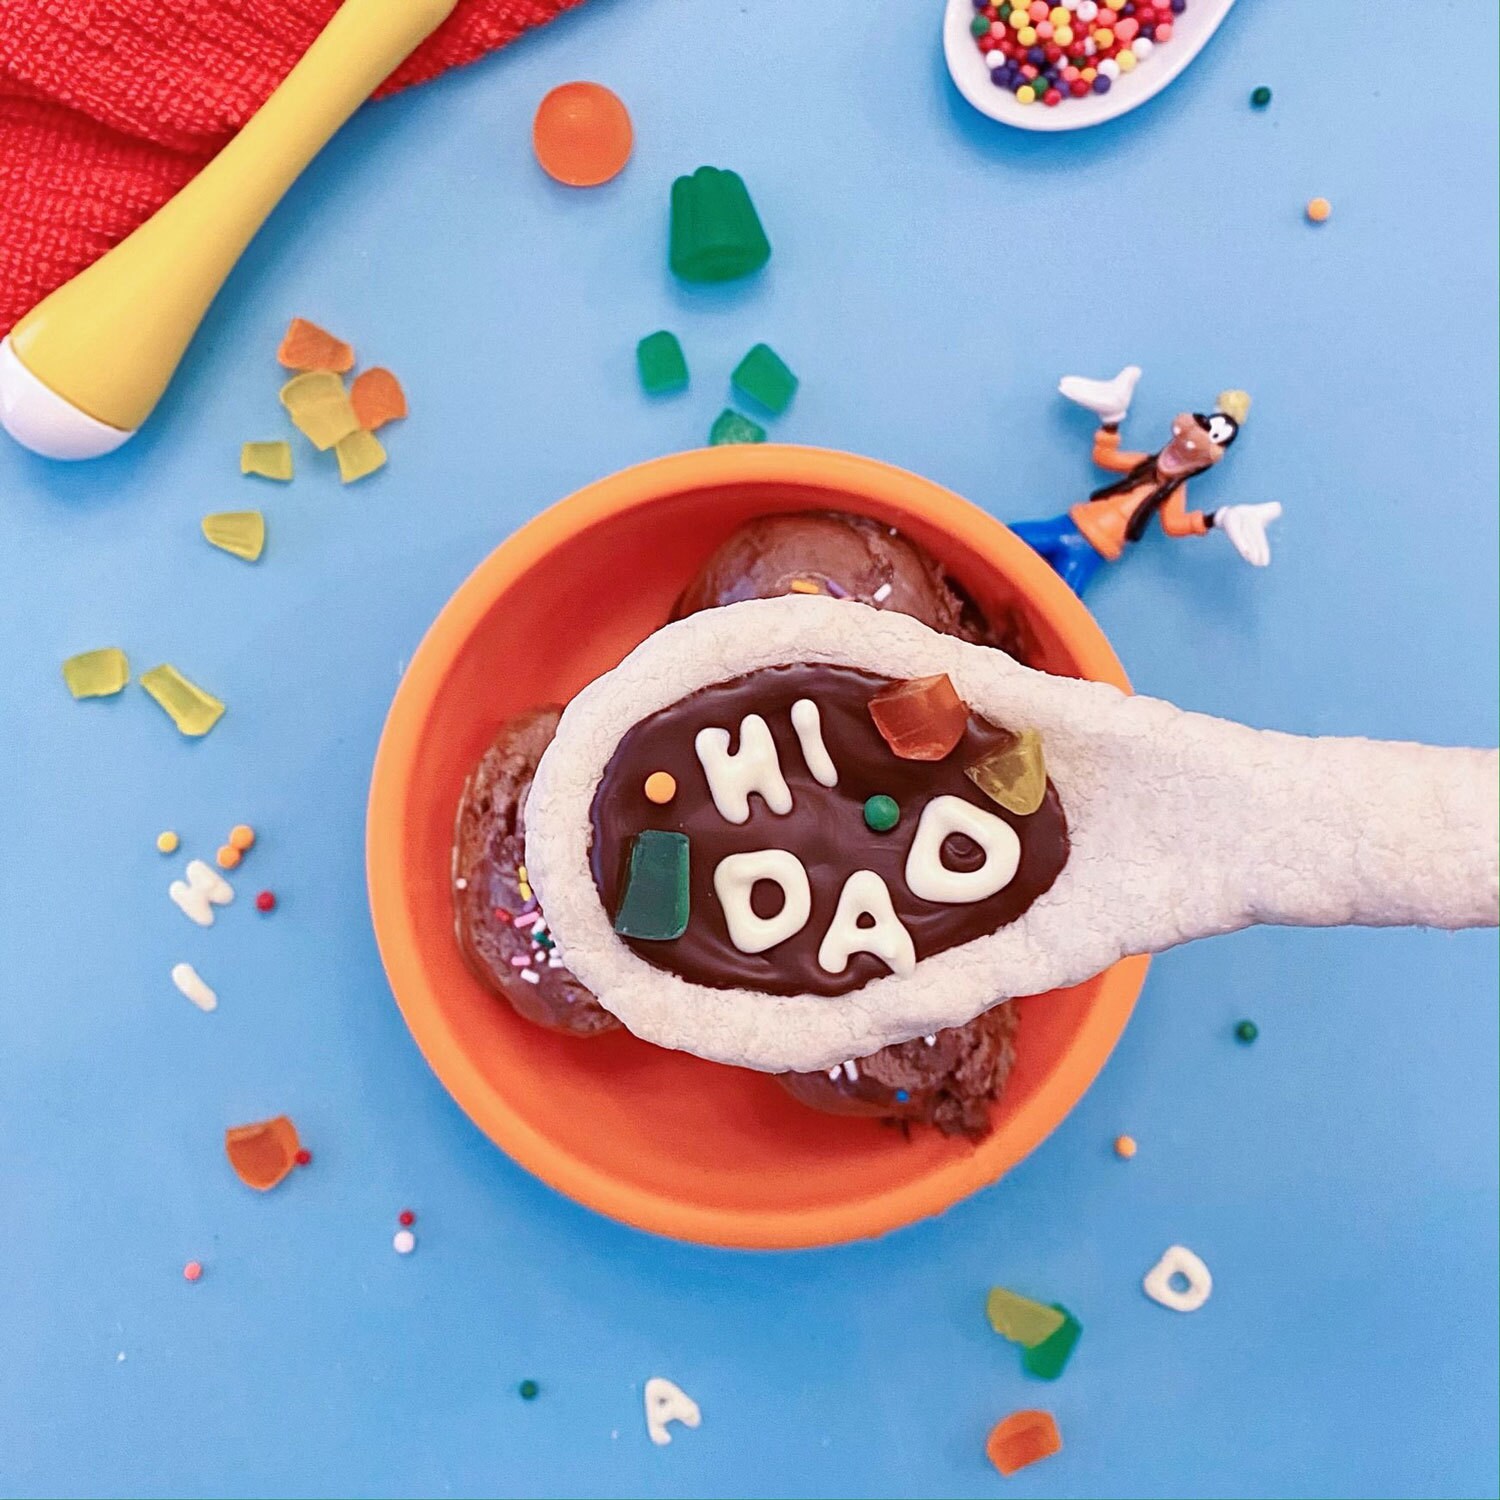 A cookie shaped like a soup spoon, decorated with the phrase "Hi Dad," and inspired by A Goofy Movie.